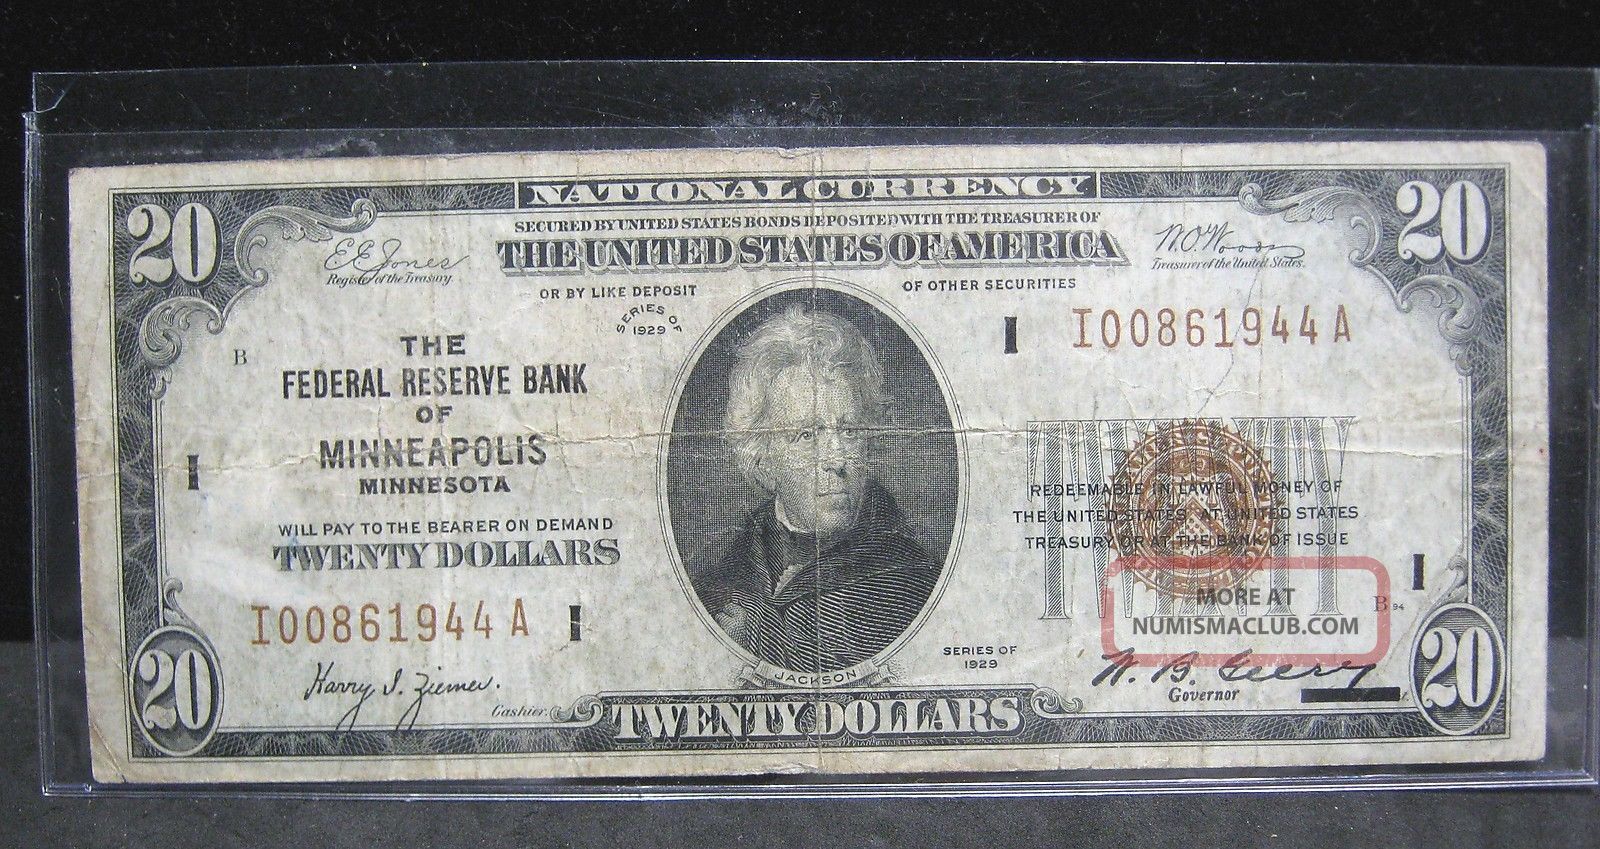 1929 National Currency Note $20 - The Federal Reserve Bank Of Minneapolis - 1944a Paper Money: US photo